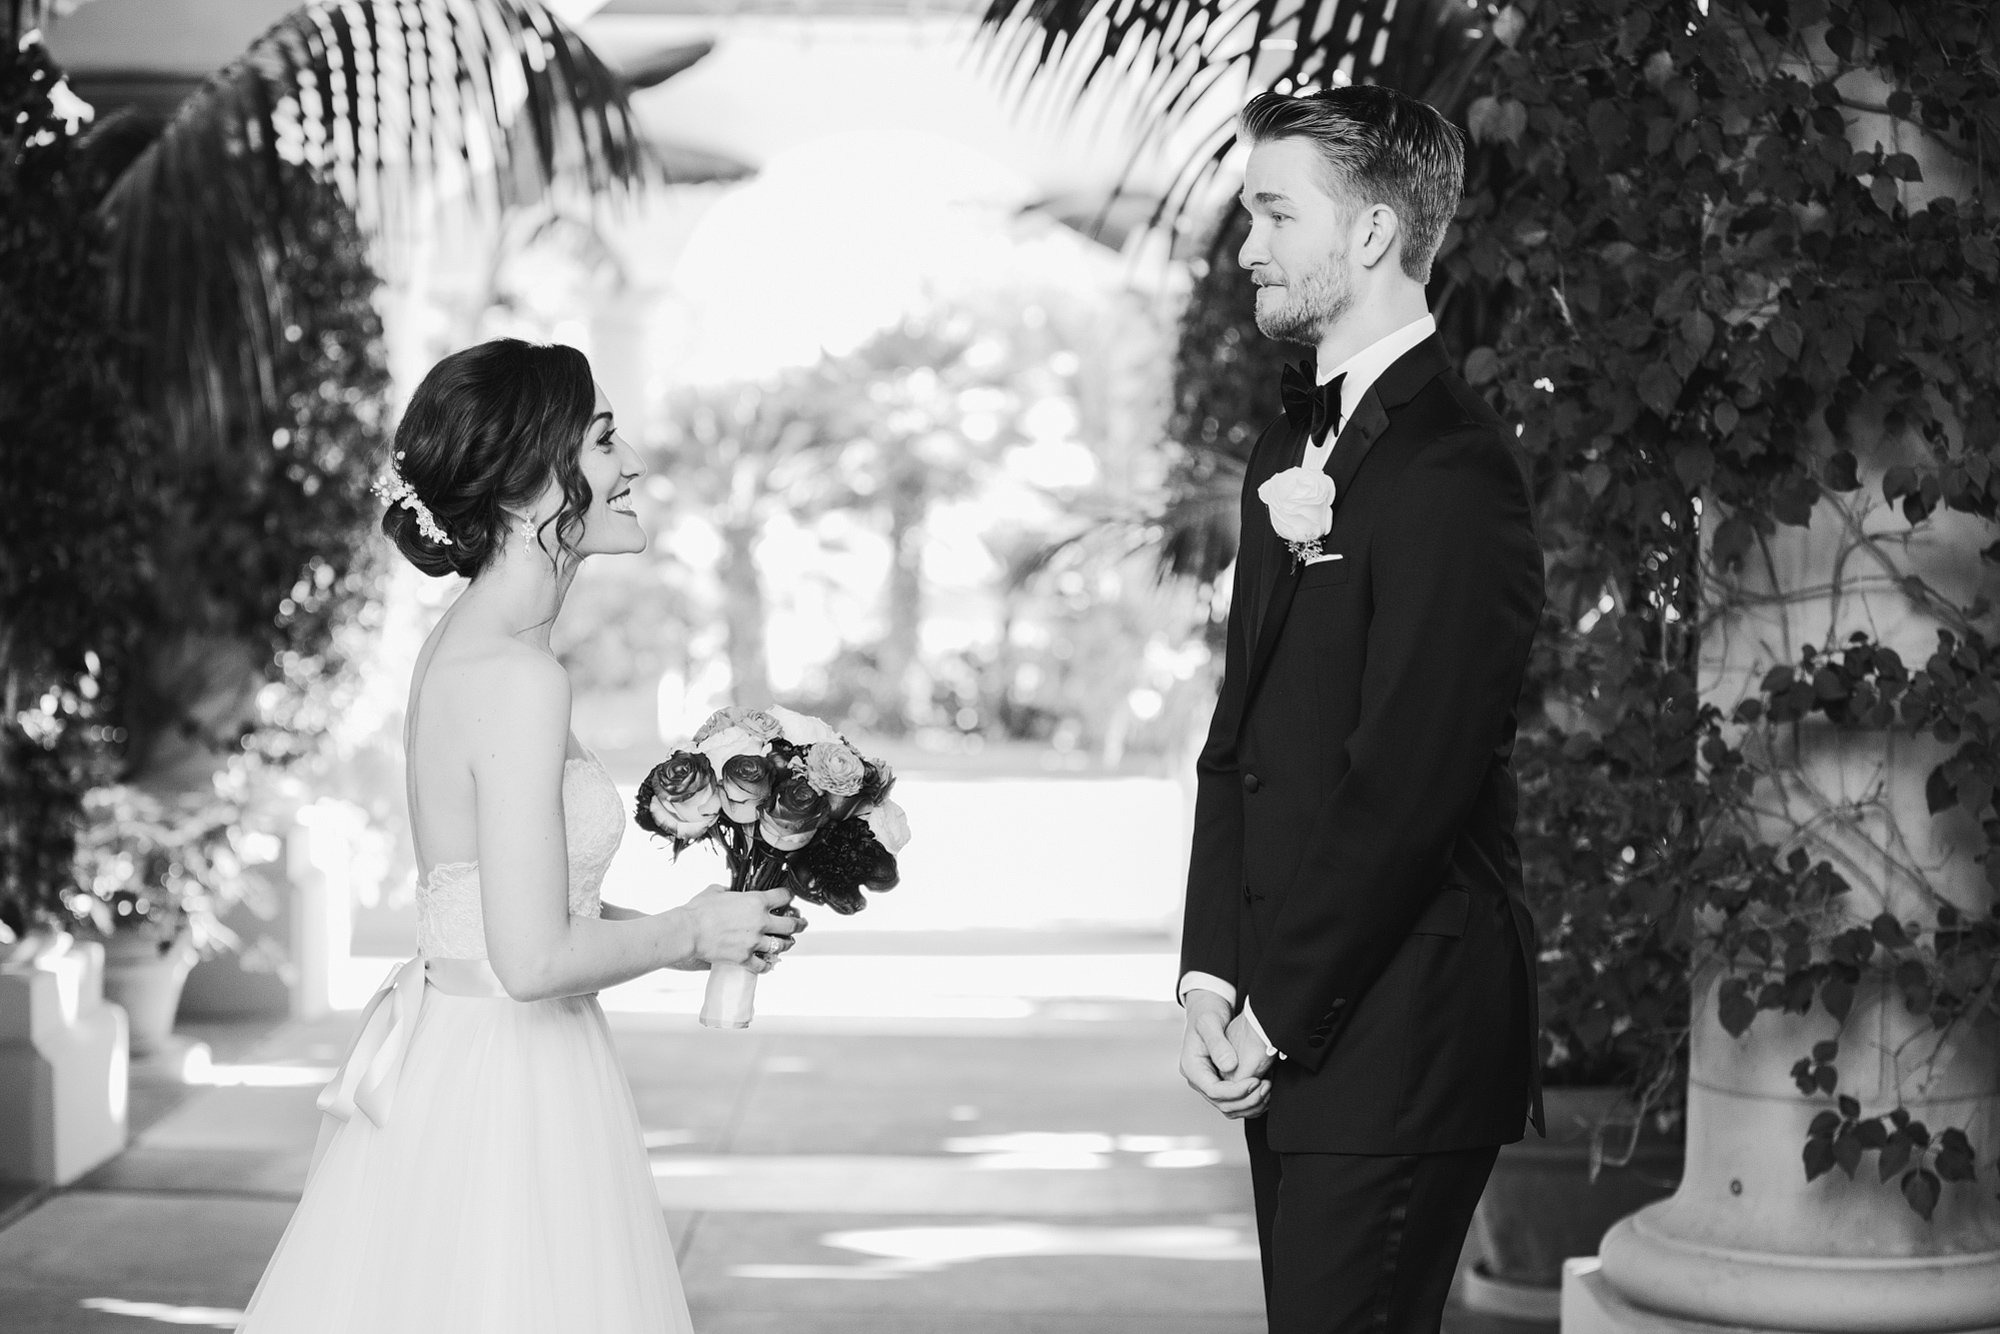 A sweet photo of the couple seeing each other on their wedding day. 